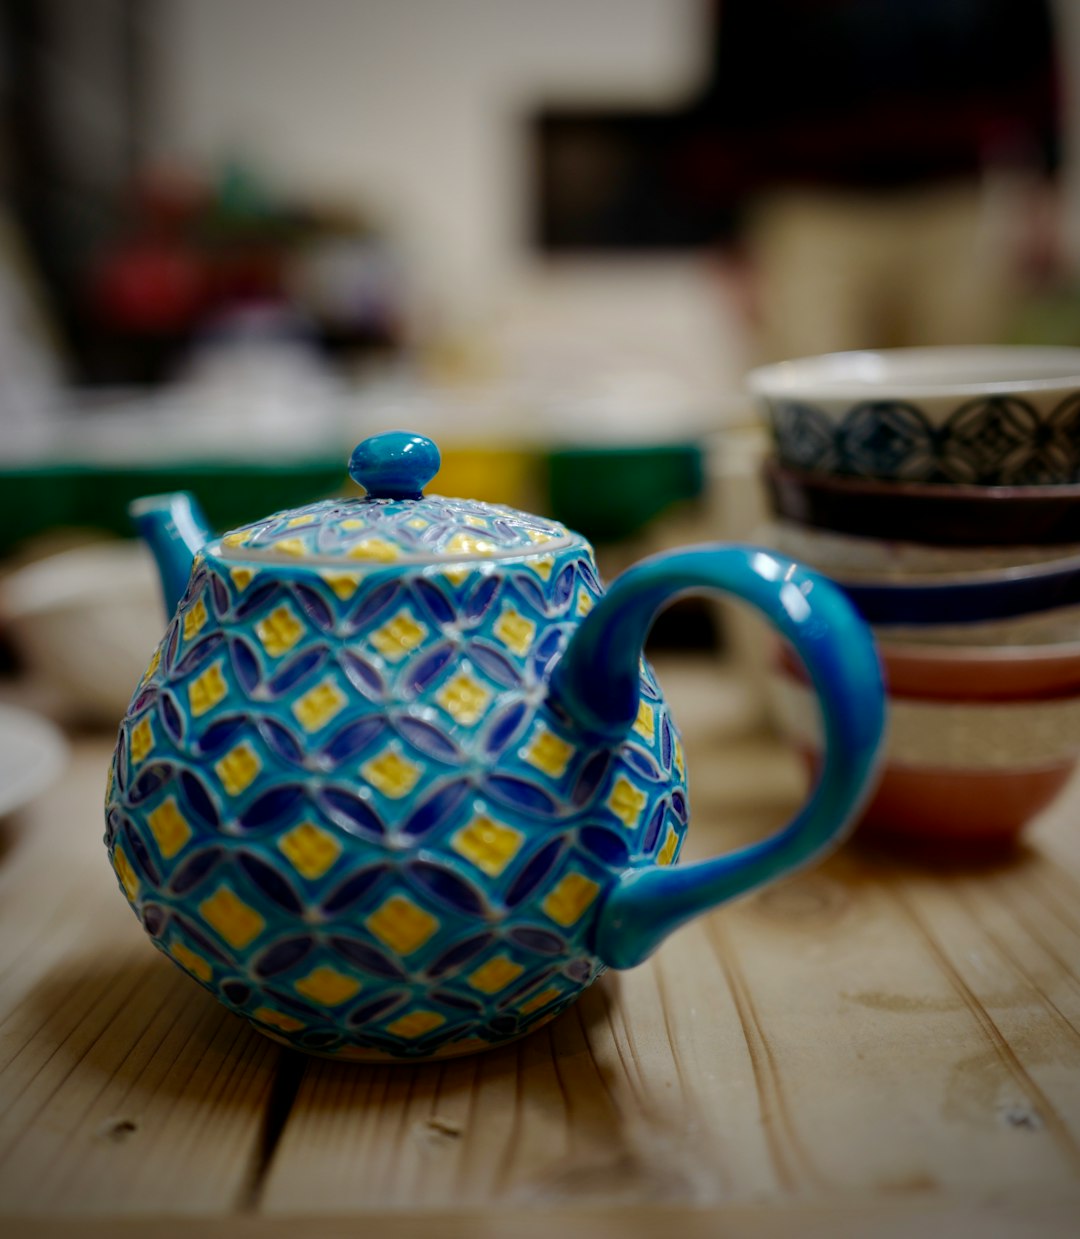 blue and white ceramic teapot on brown wooden table